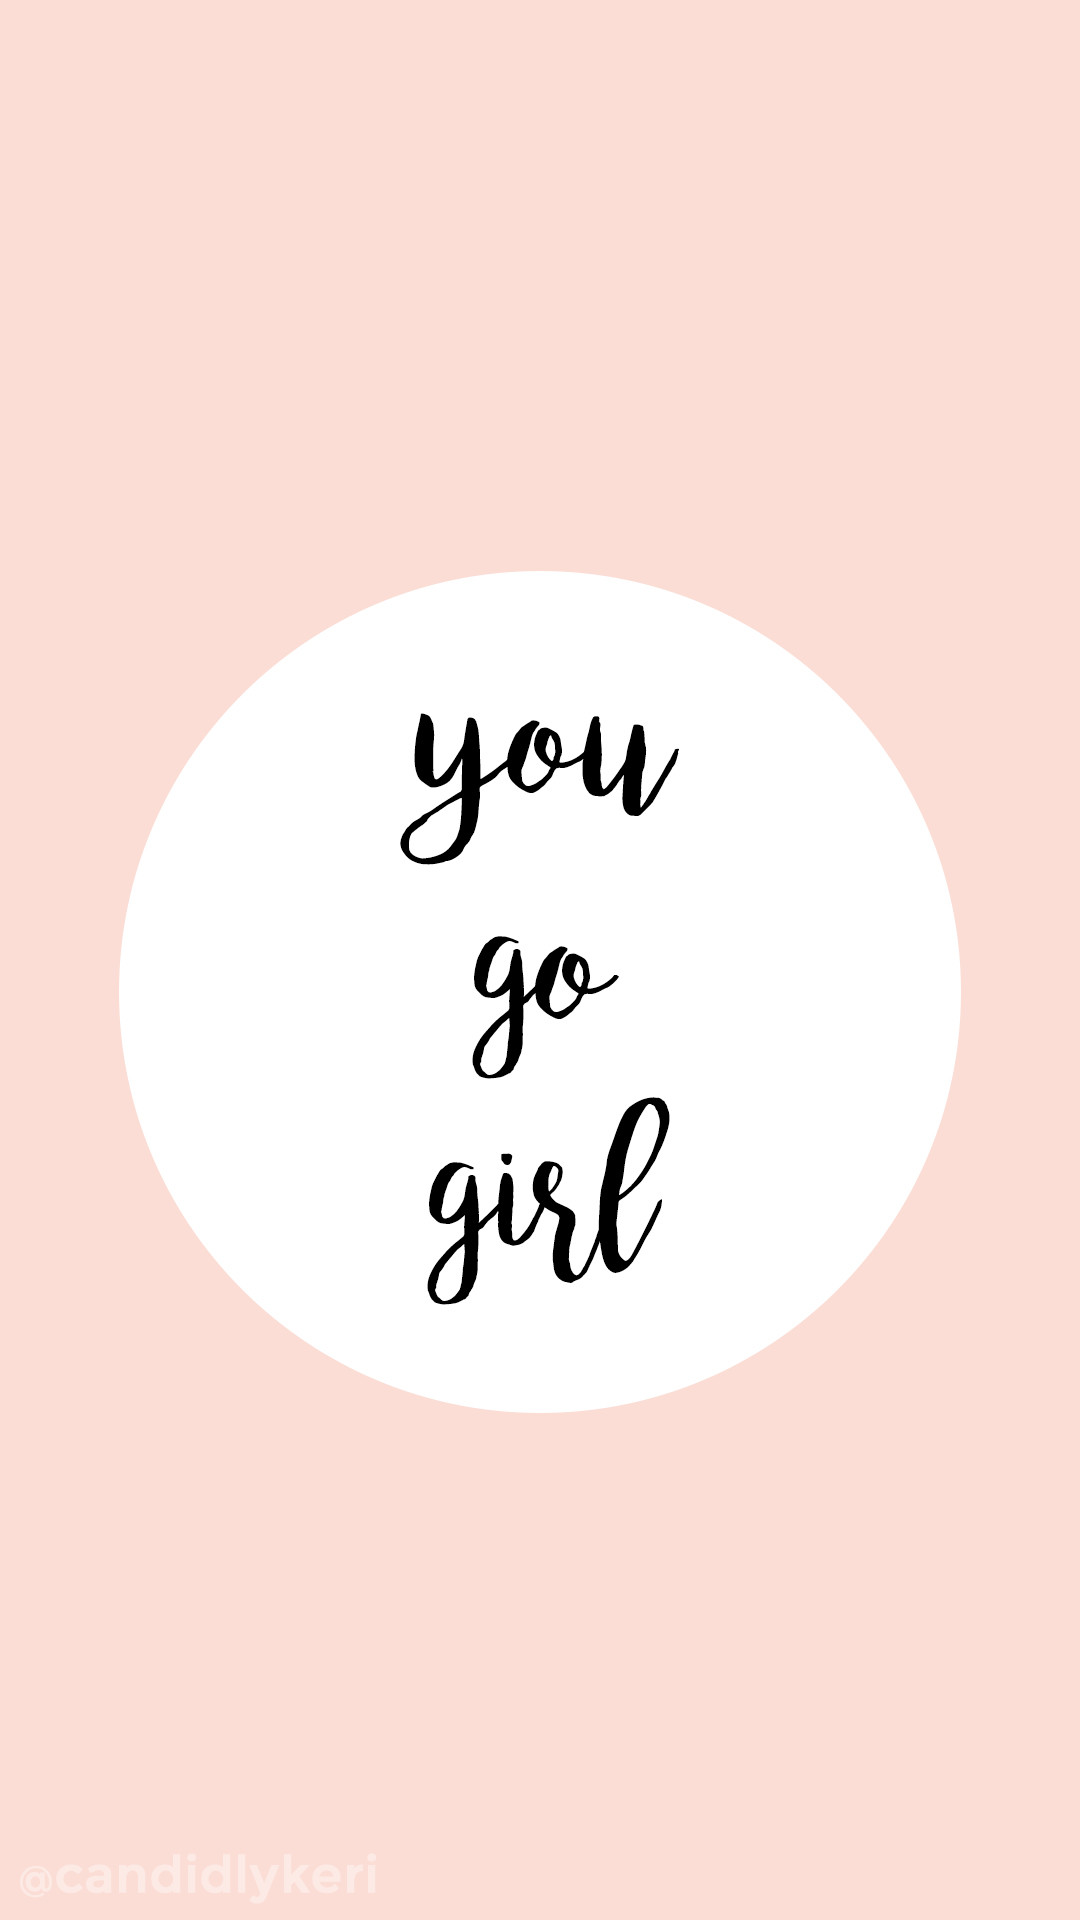 You Go Girl Pink quote inspirational background wallpaper you can download for free